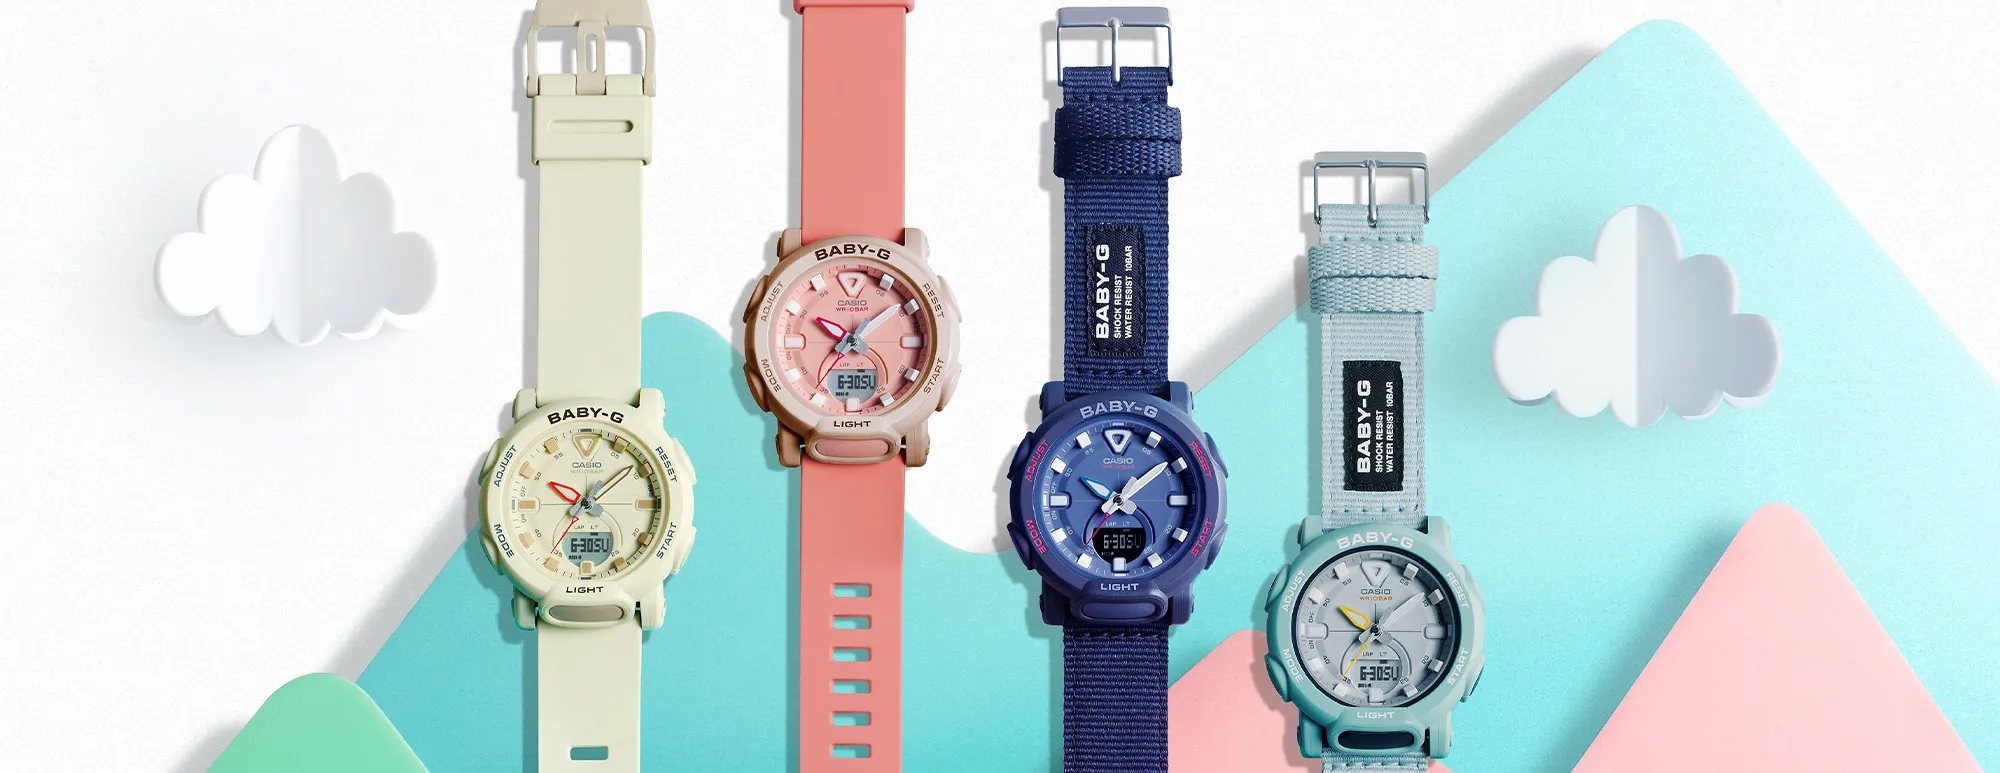 Timepiece Collection Of Baby-G Series Fashionable With Function